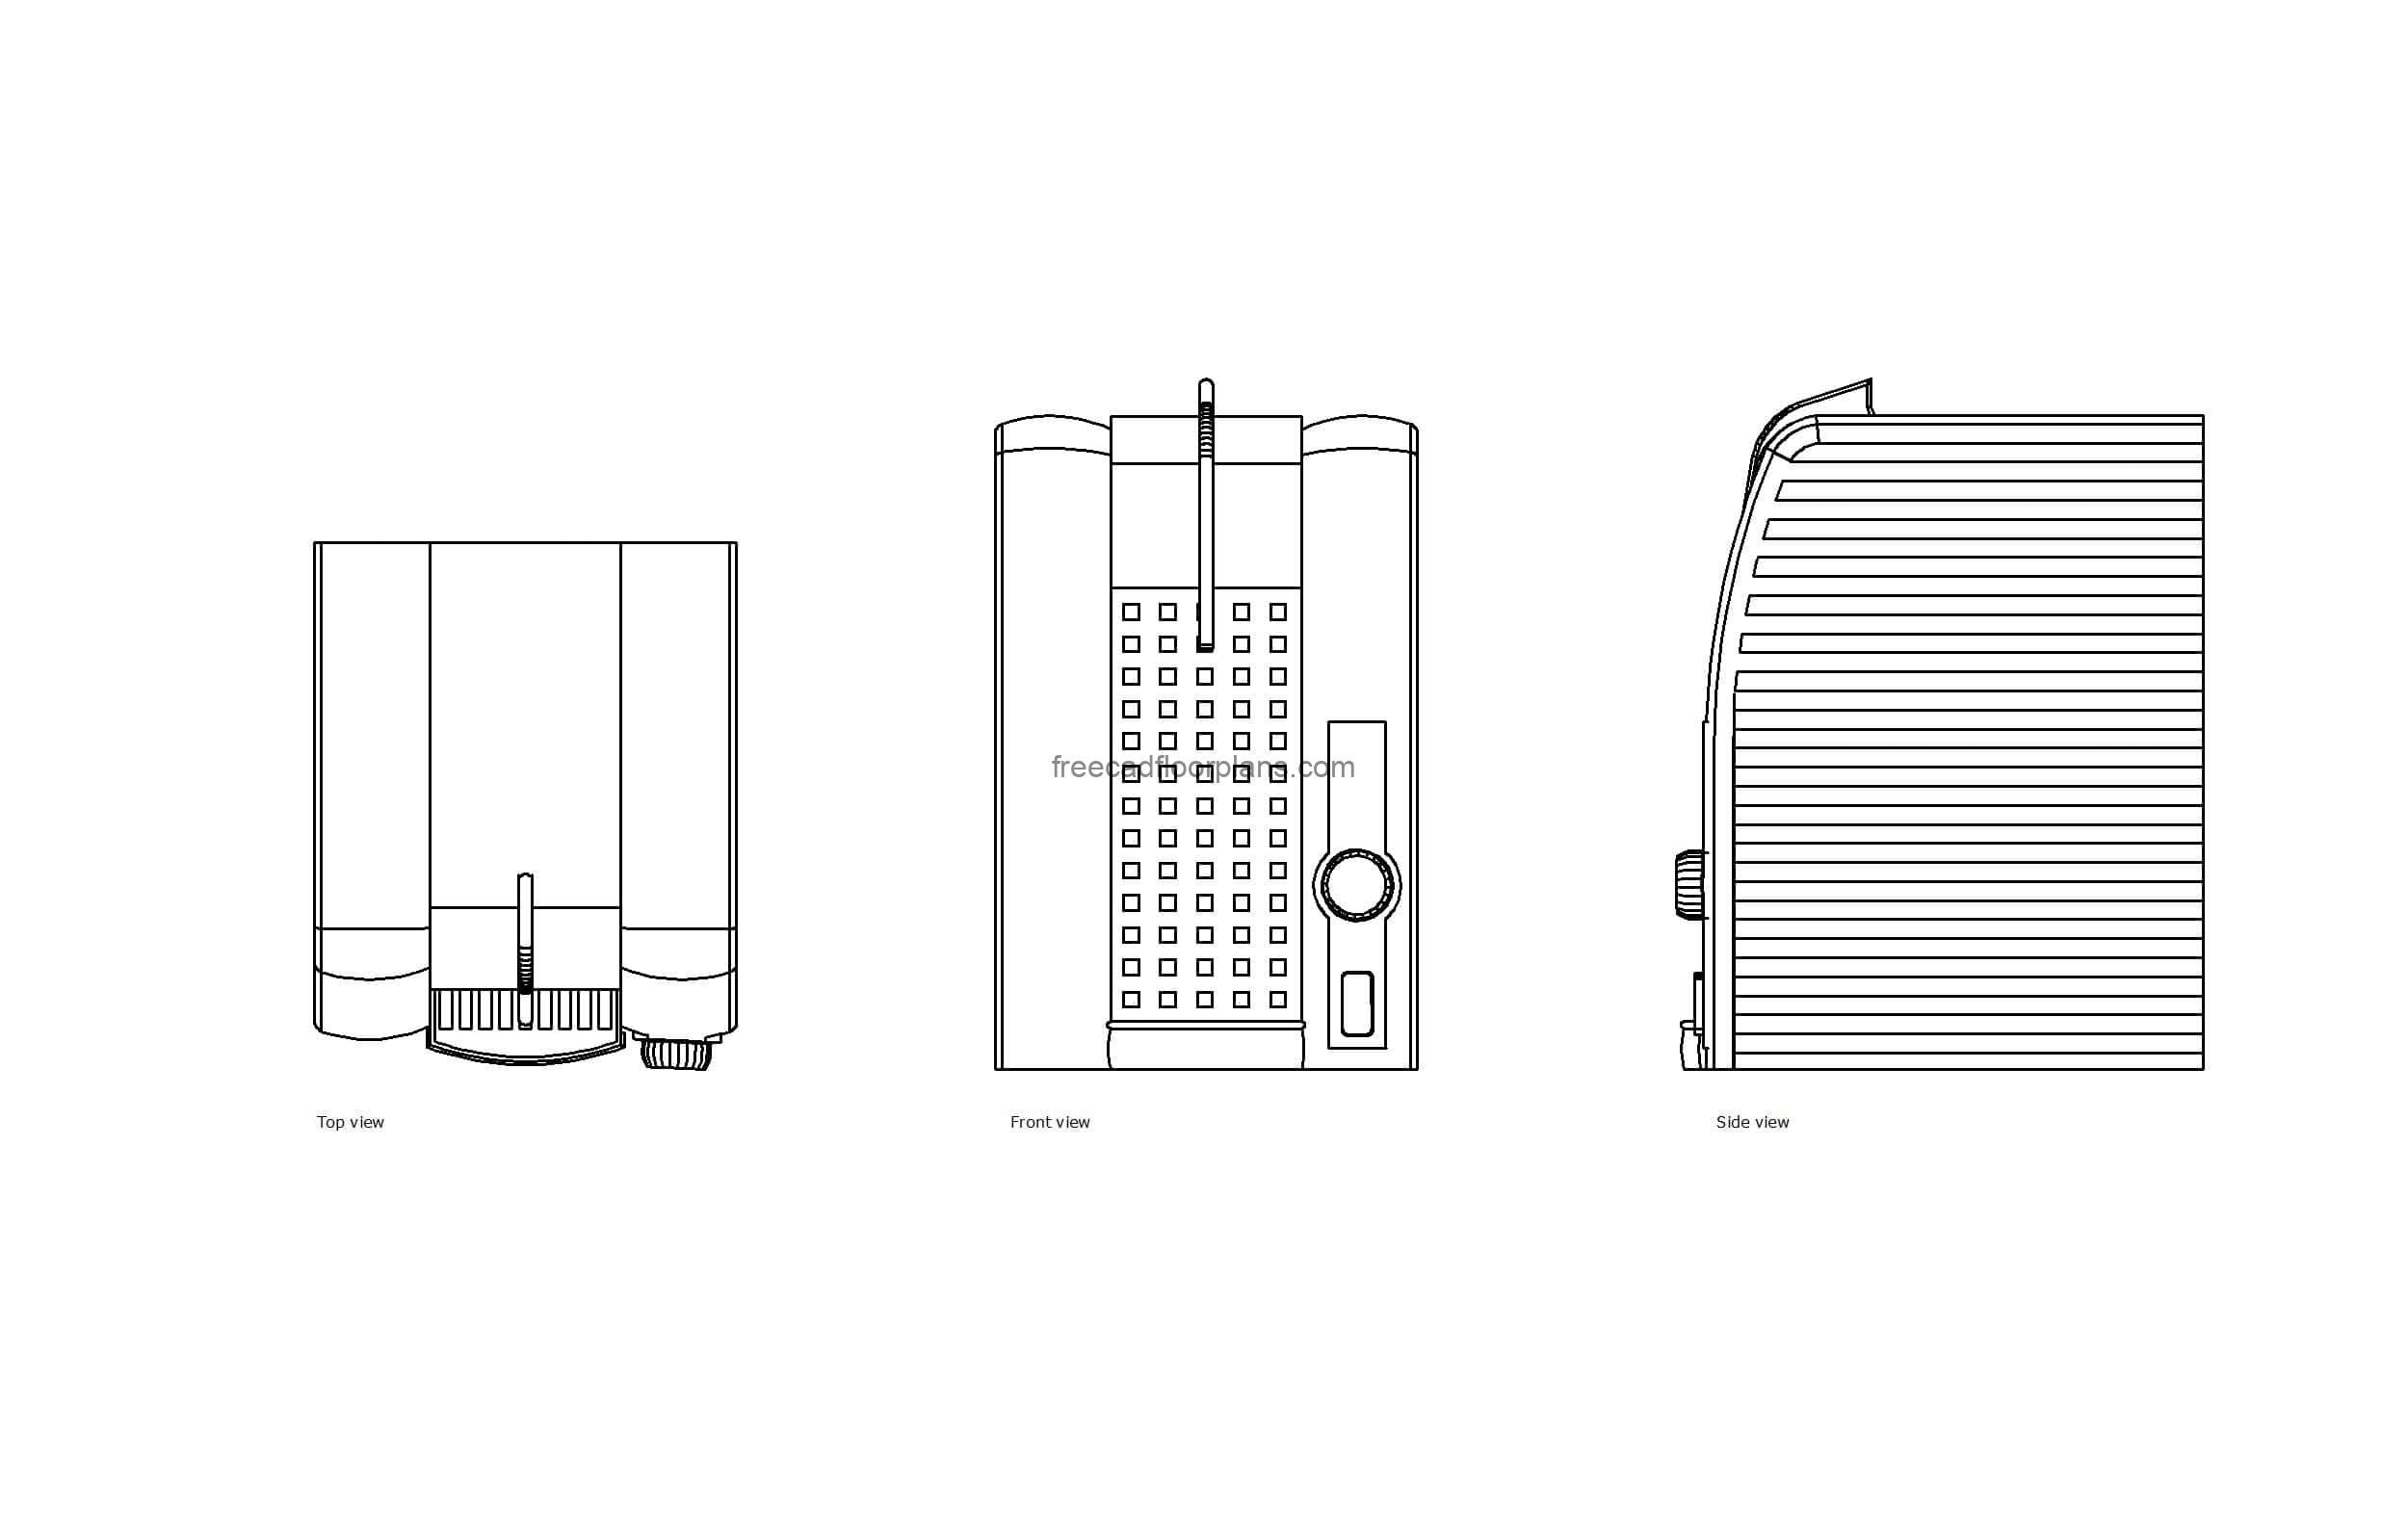 autocad drawing of a water purifier, plan and elevation 2d views, dwg file free for download